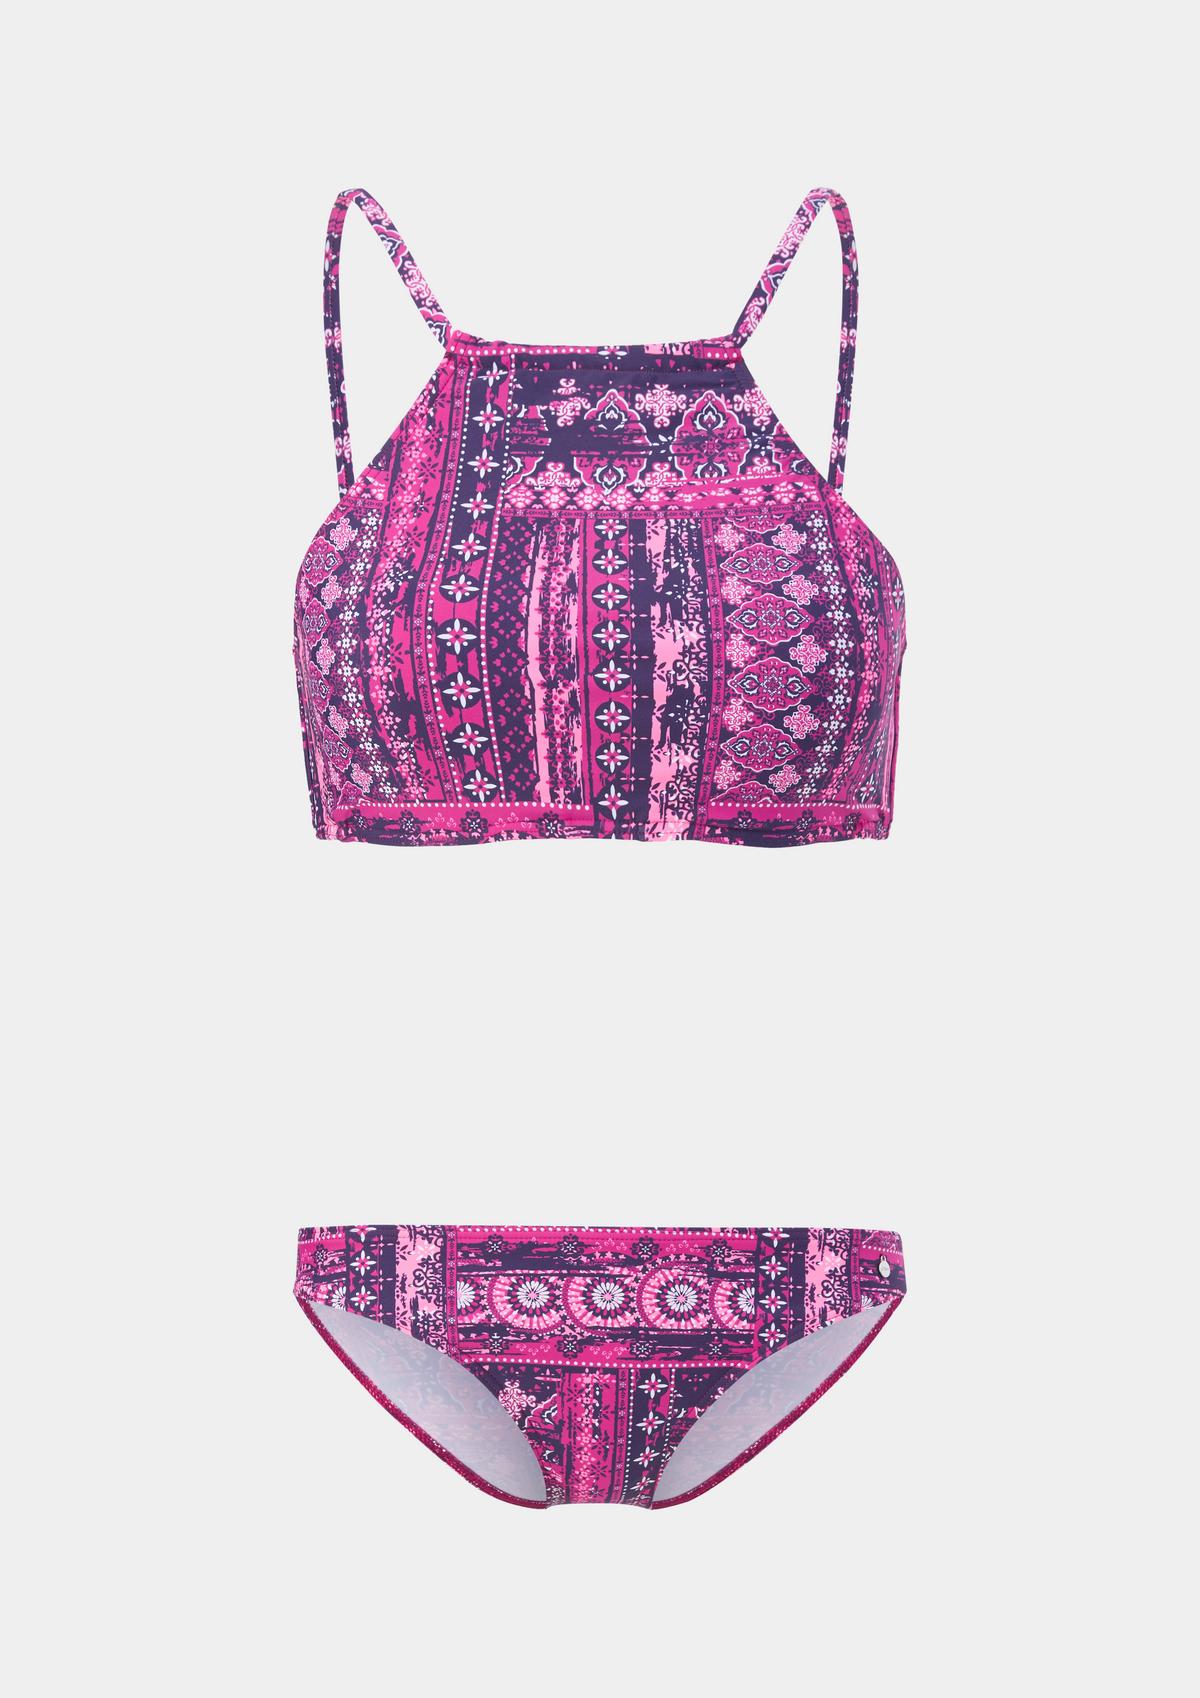 s.Oliver Bustier-Bikini im Set mit All-over-Muster